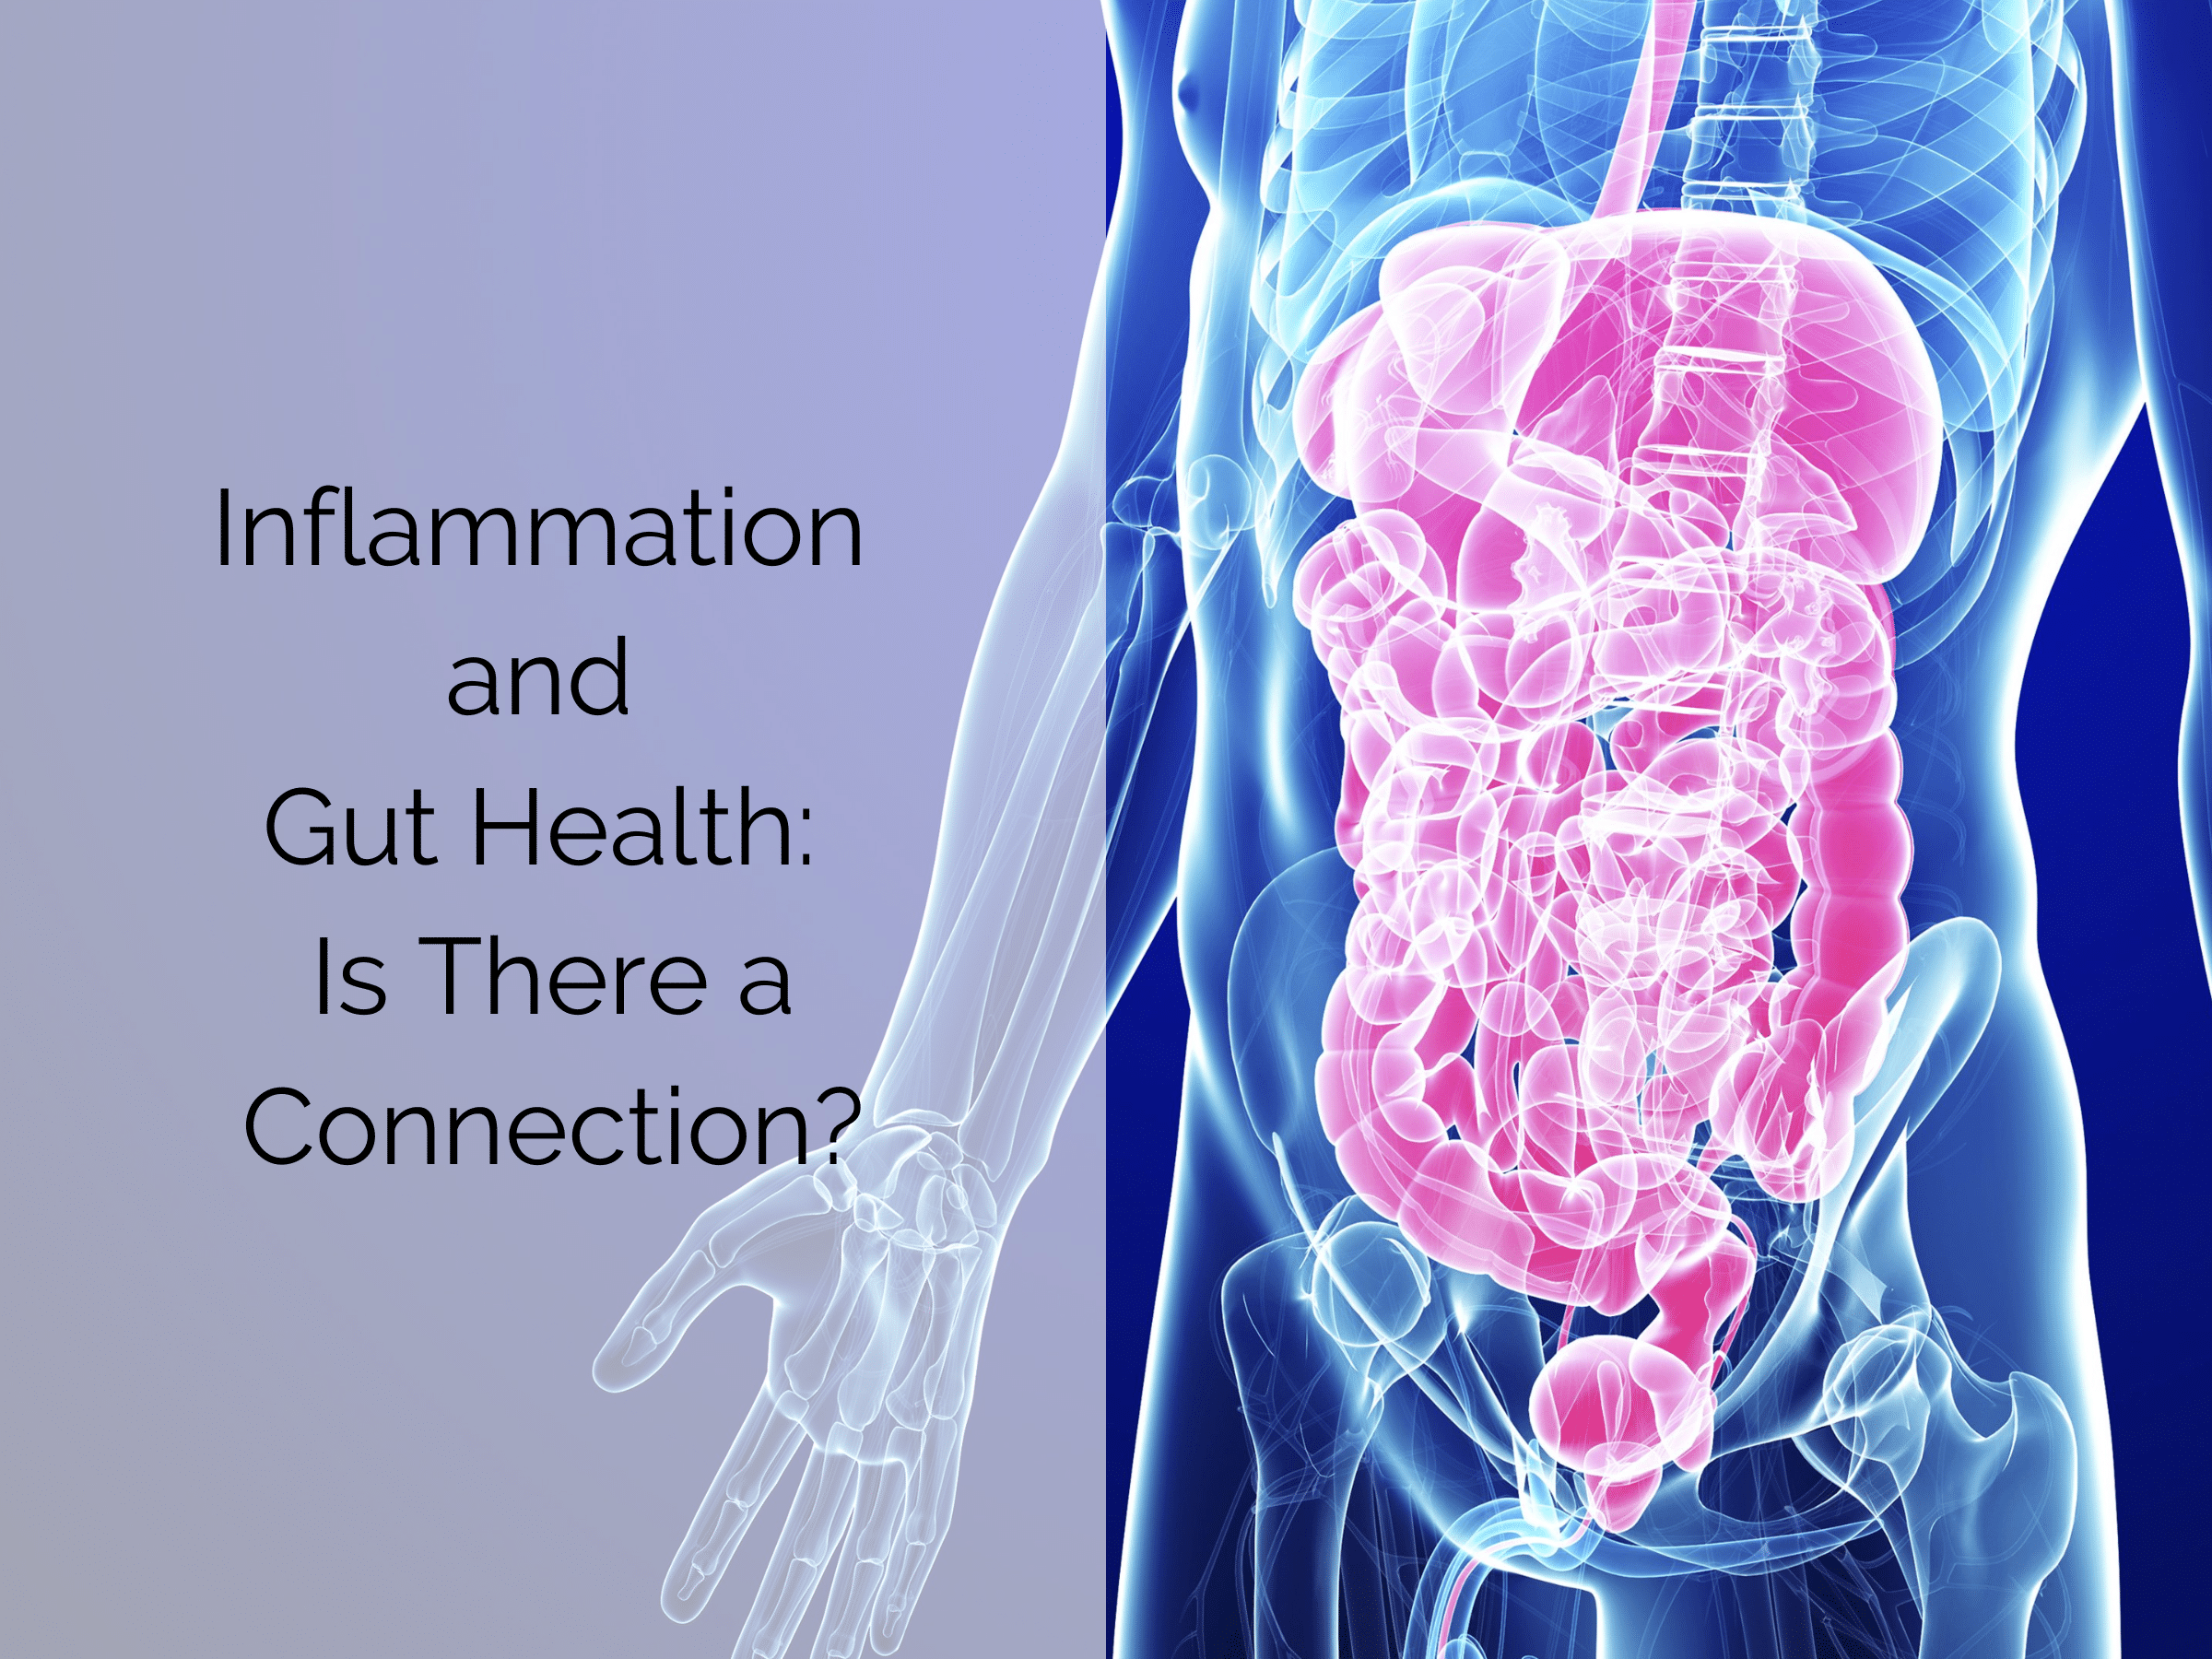 Gut Health and Inflammation (4 × 3 in)